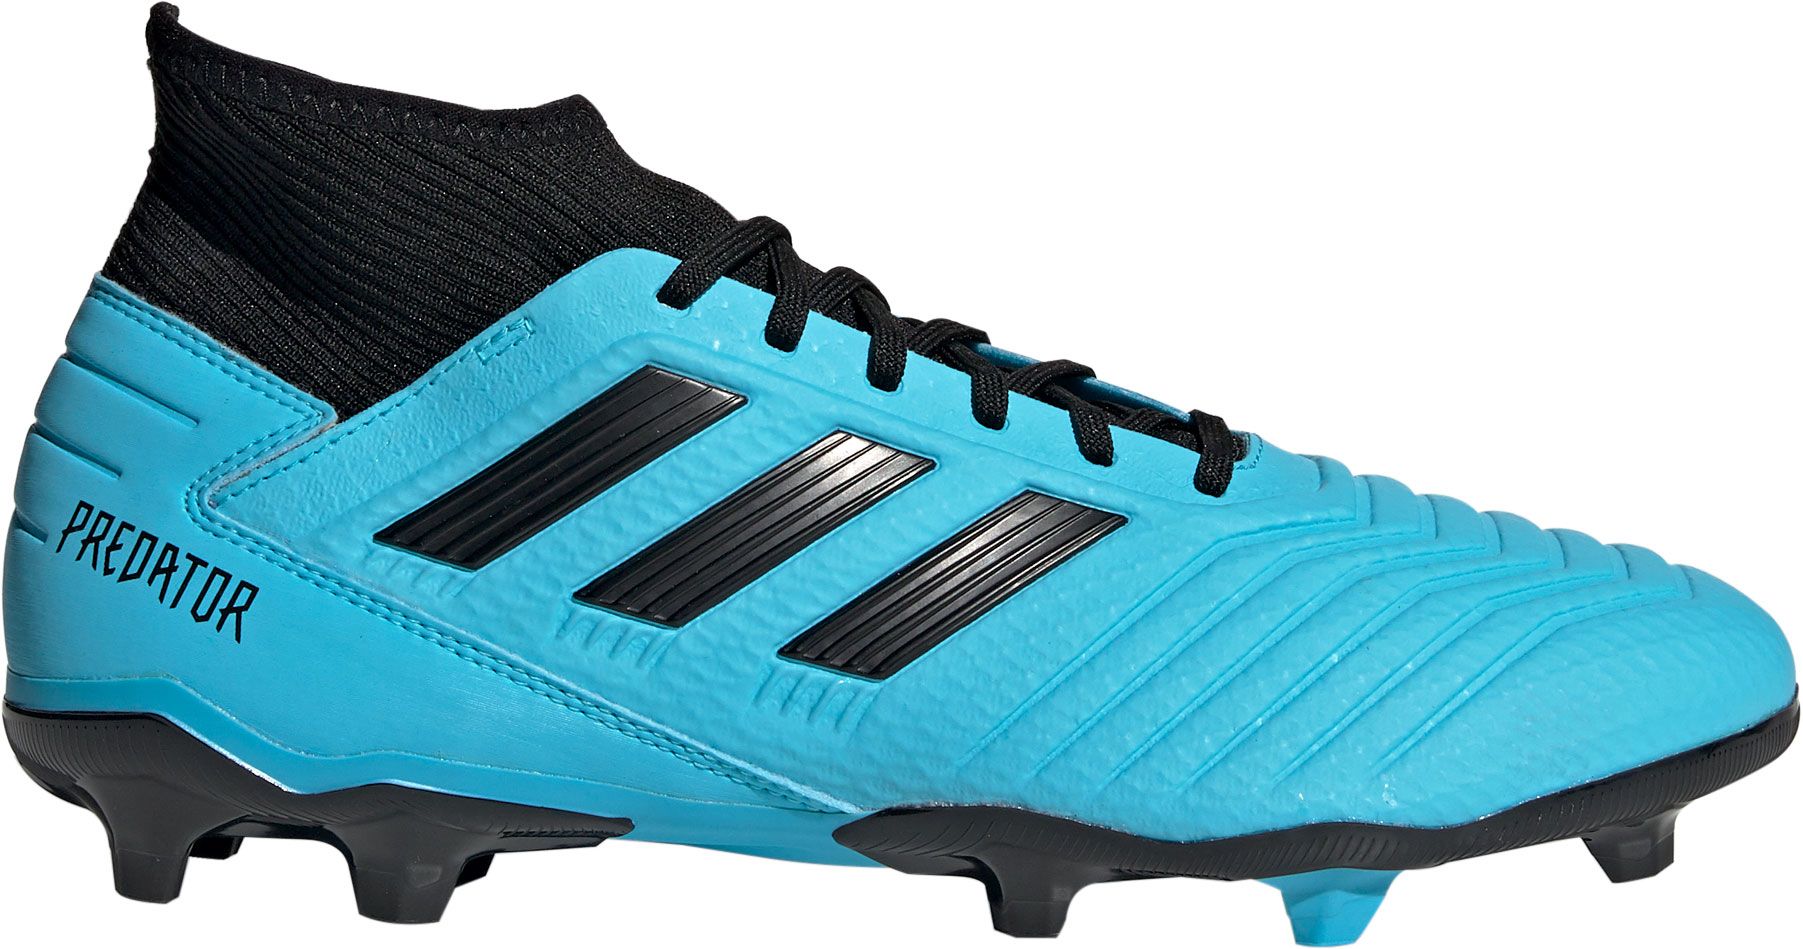 soccer cleats under 50 dollars